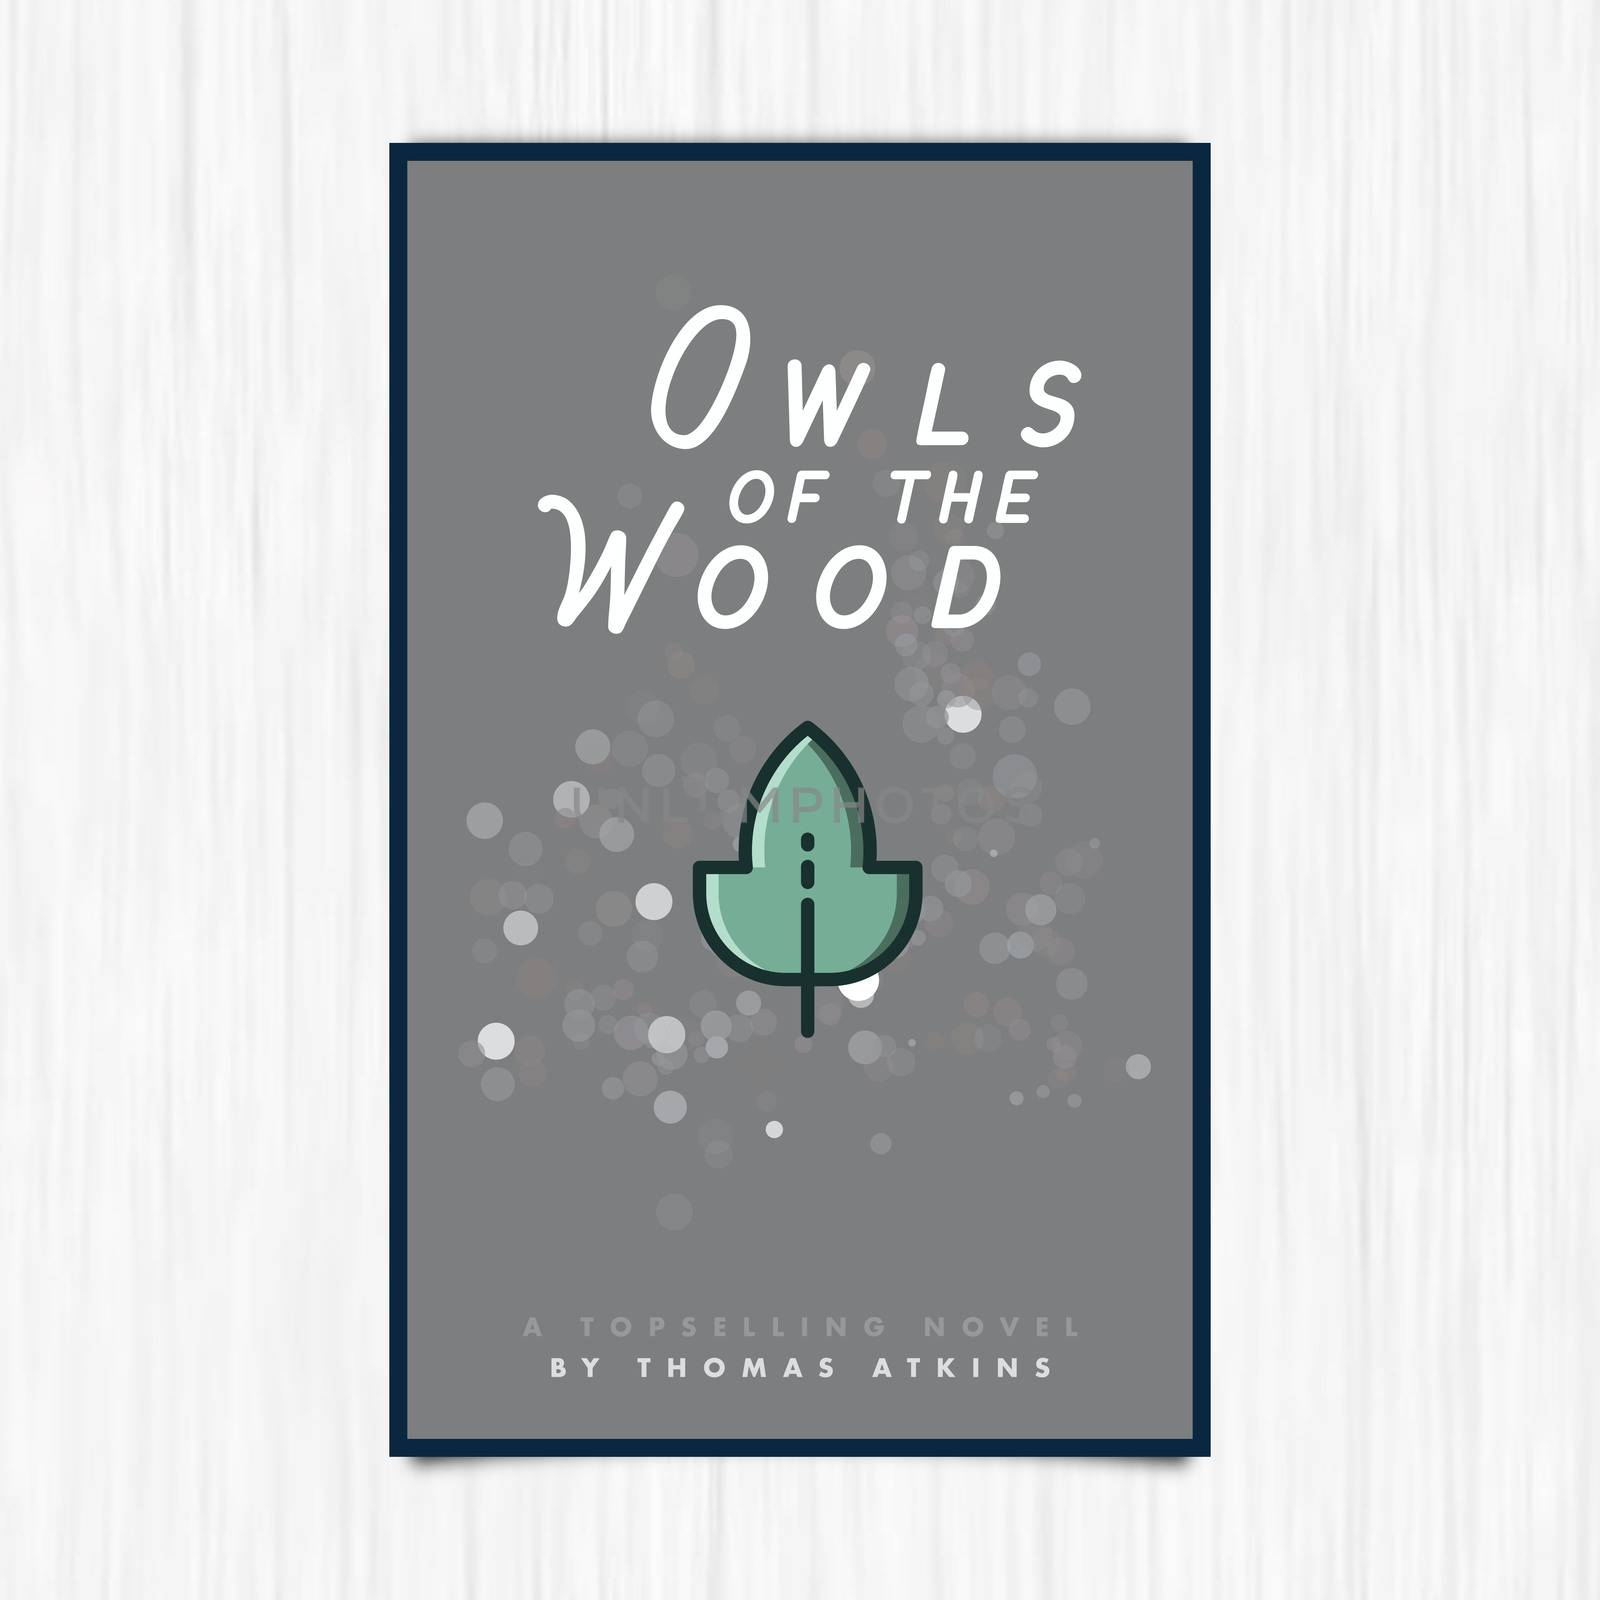 Vector of novel cover with owls of the wood text by Wavebreakmedia